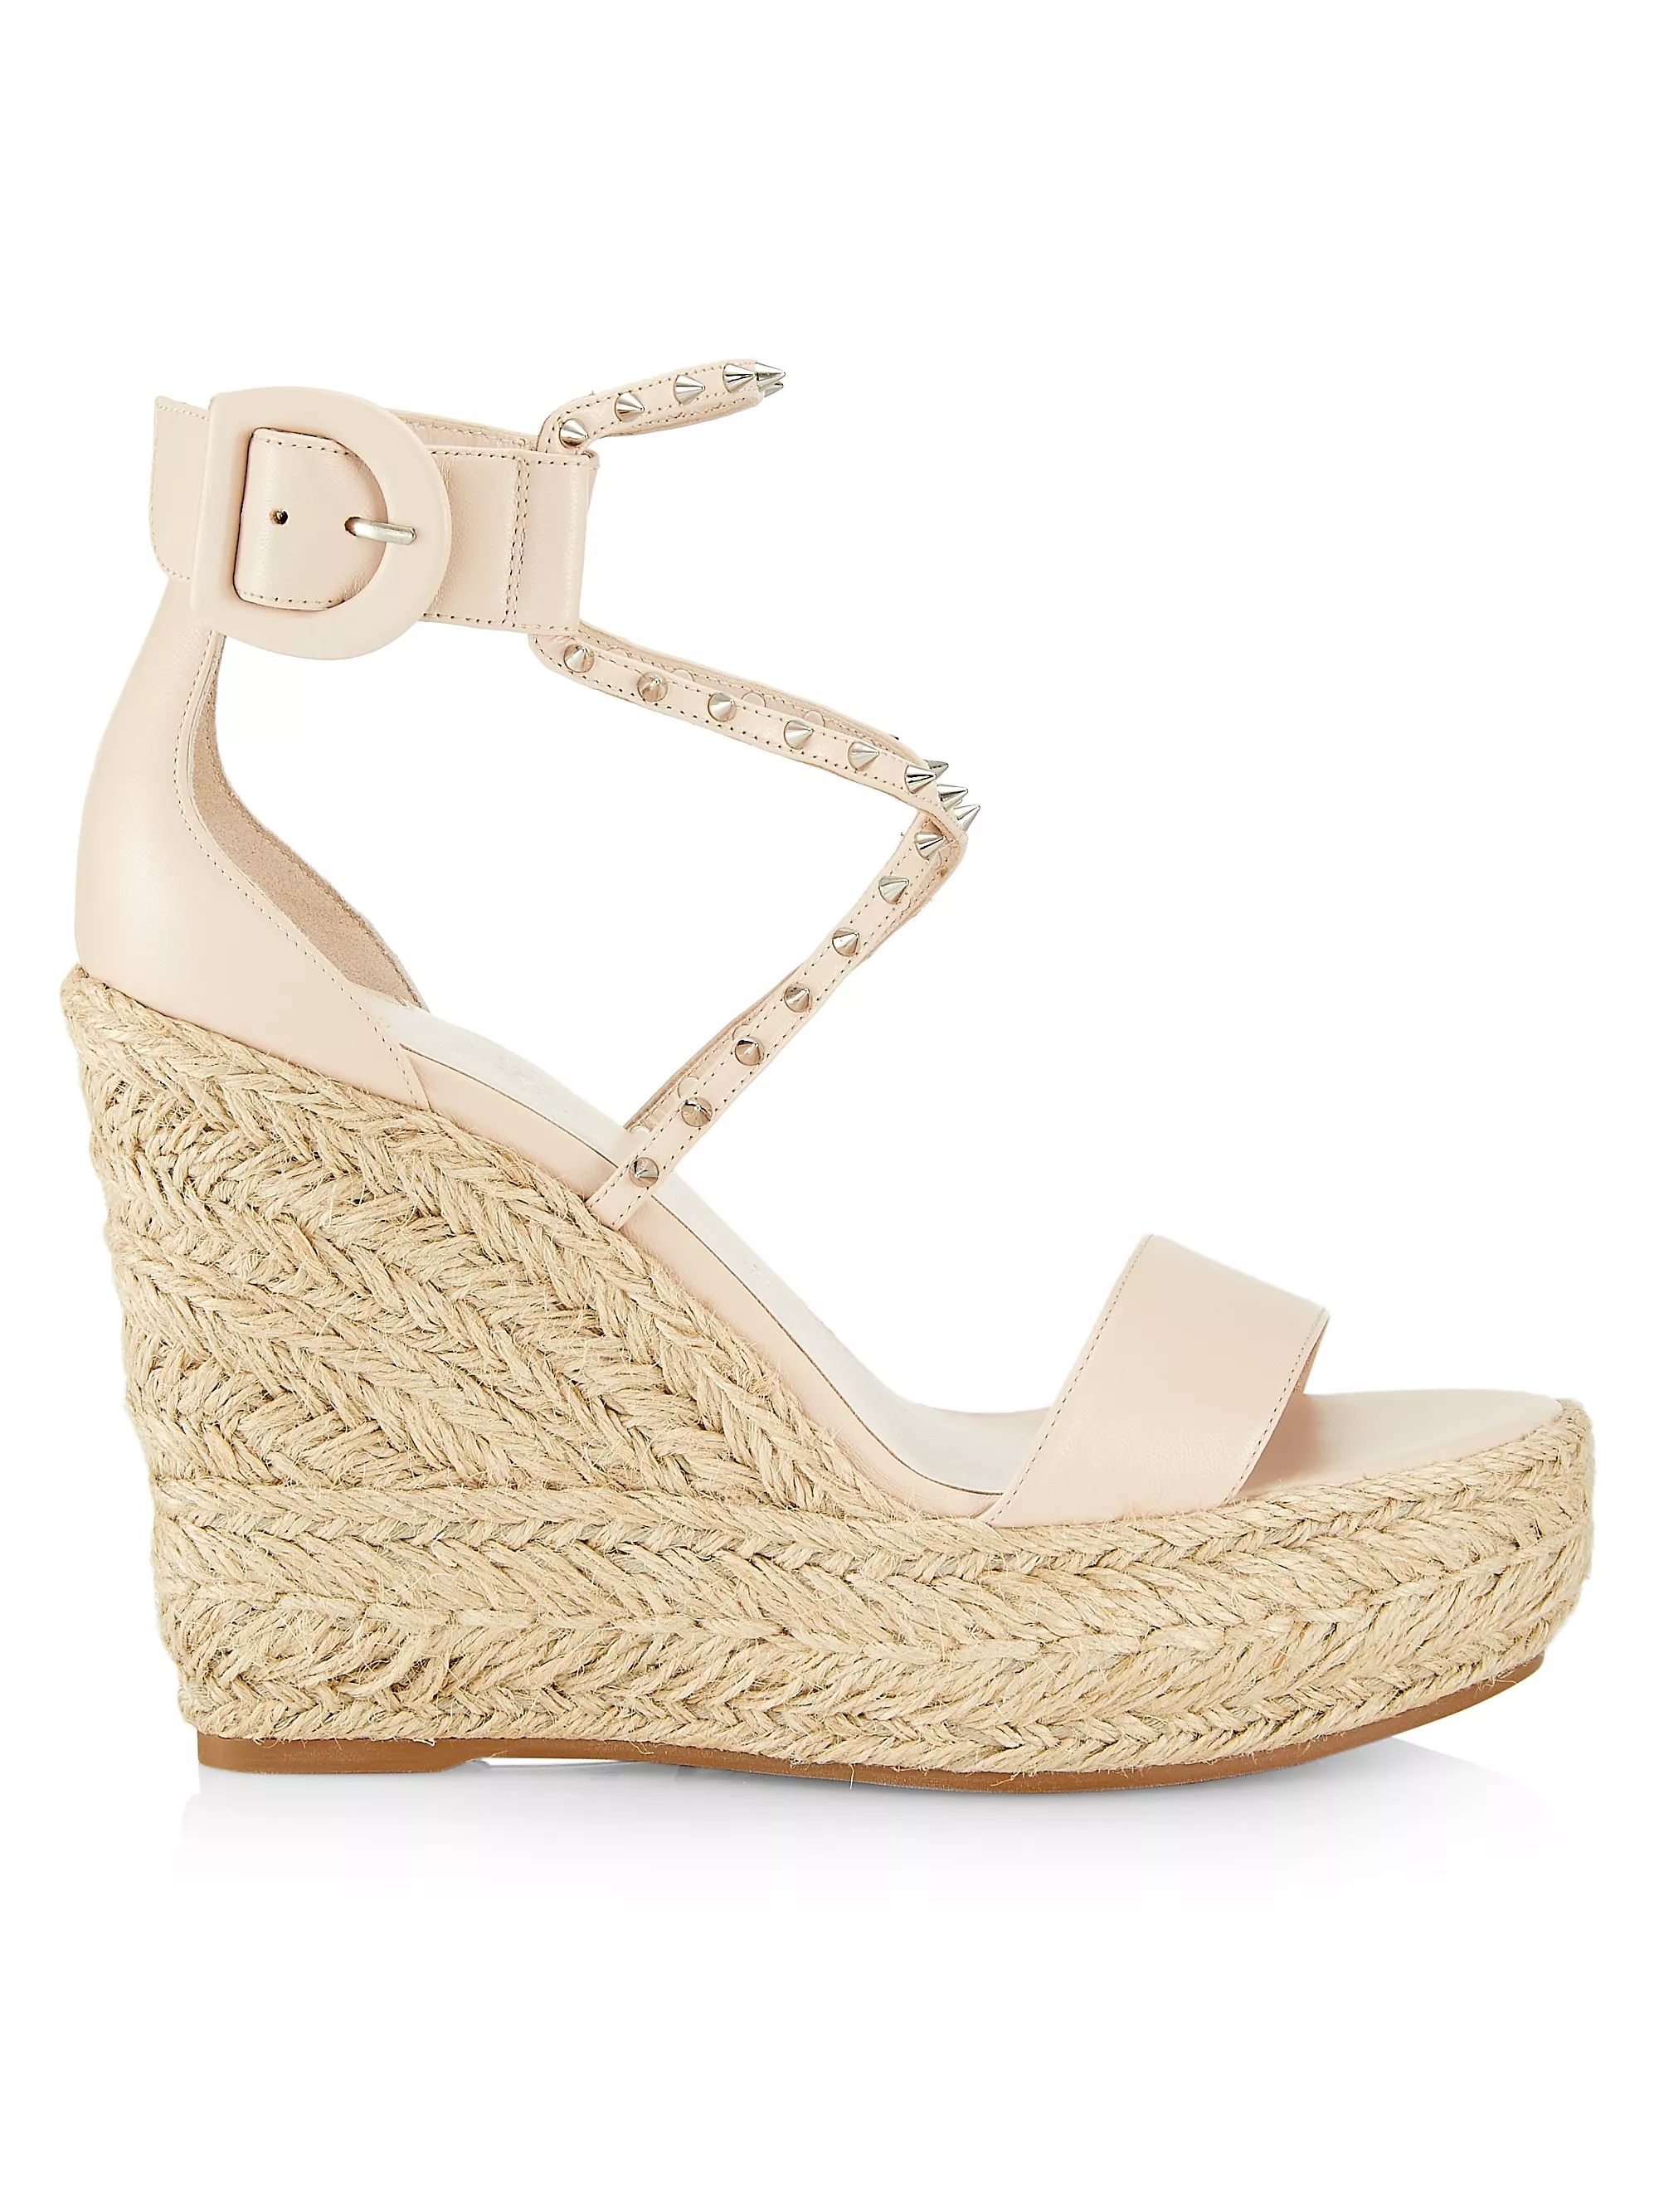 Chocazeppa Spikes 120MM Leather Wedge Sandals | Saks Fifth Avenue